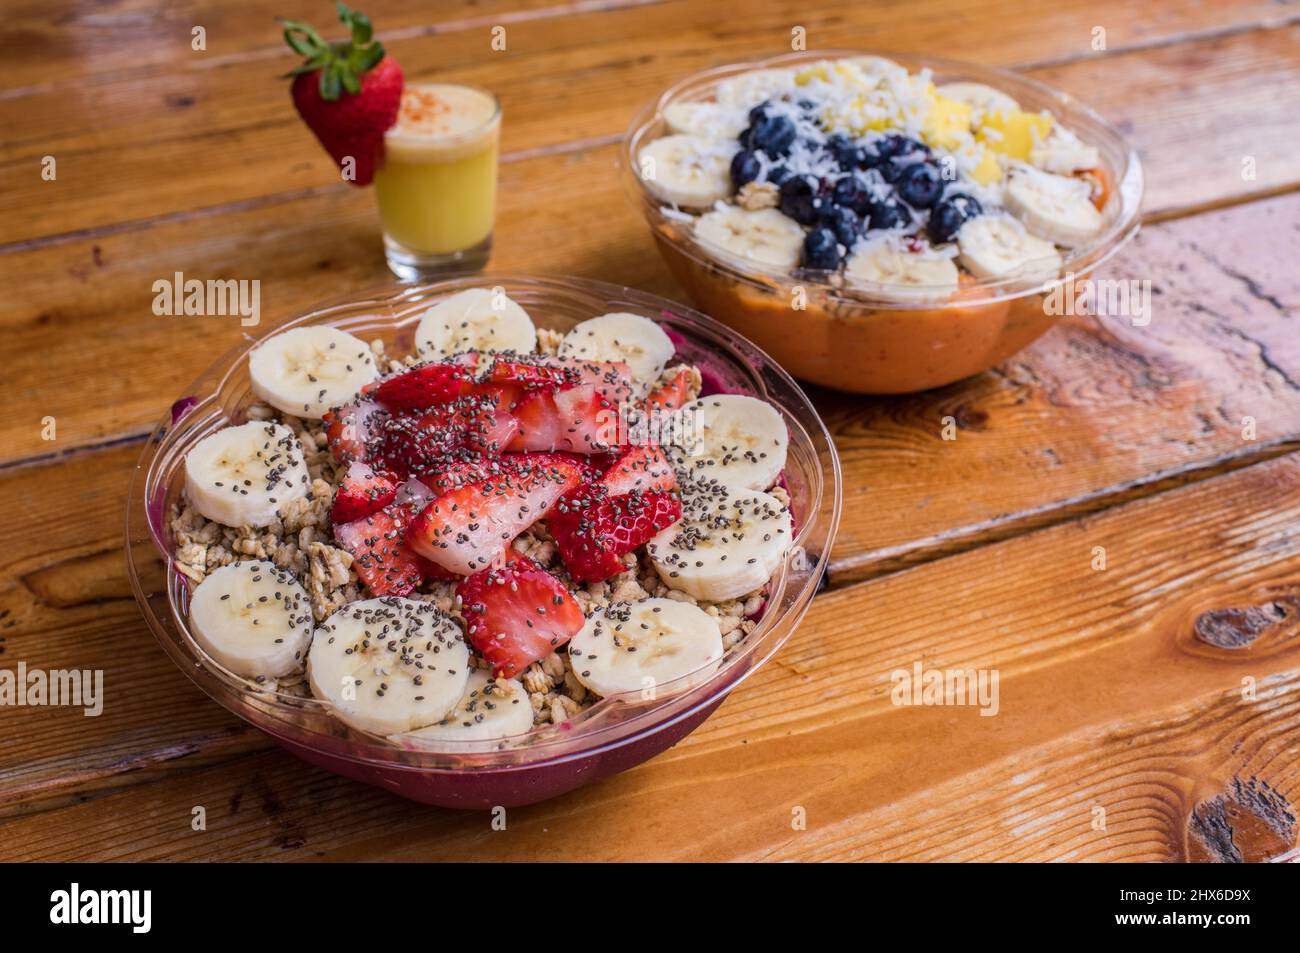 Two acai bowls with bananas and strawberries and a glass of juice with a fruit garnish on the natural pinewood table. Stock Photo